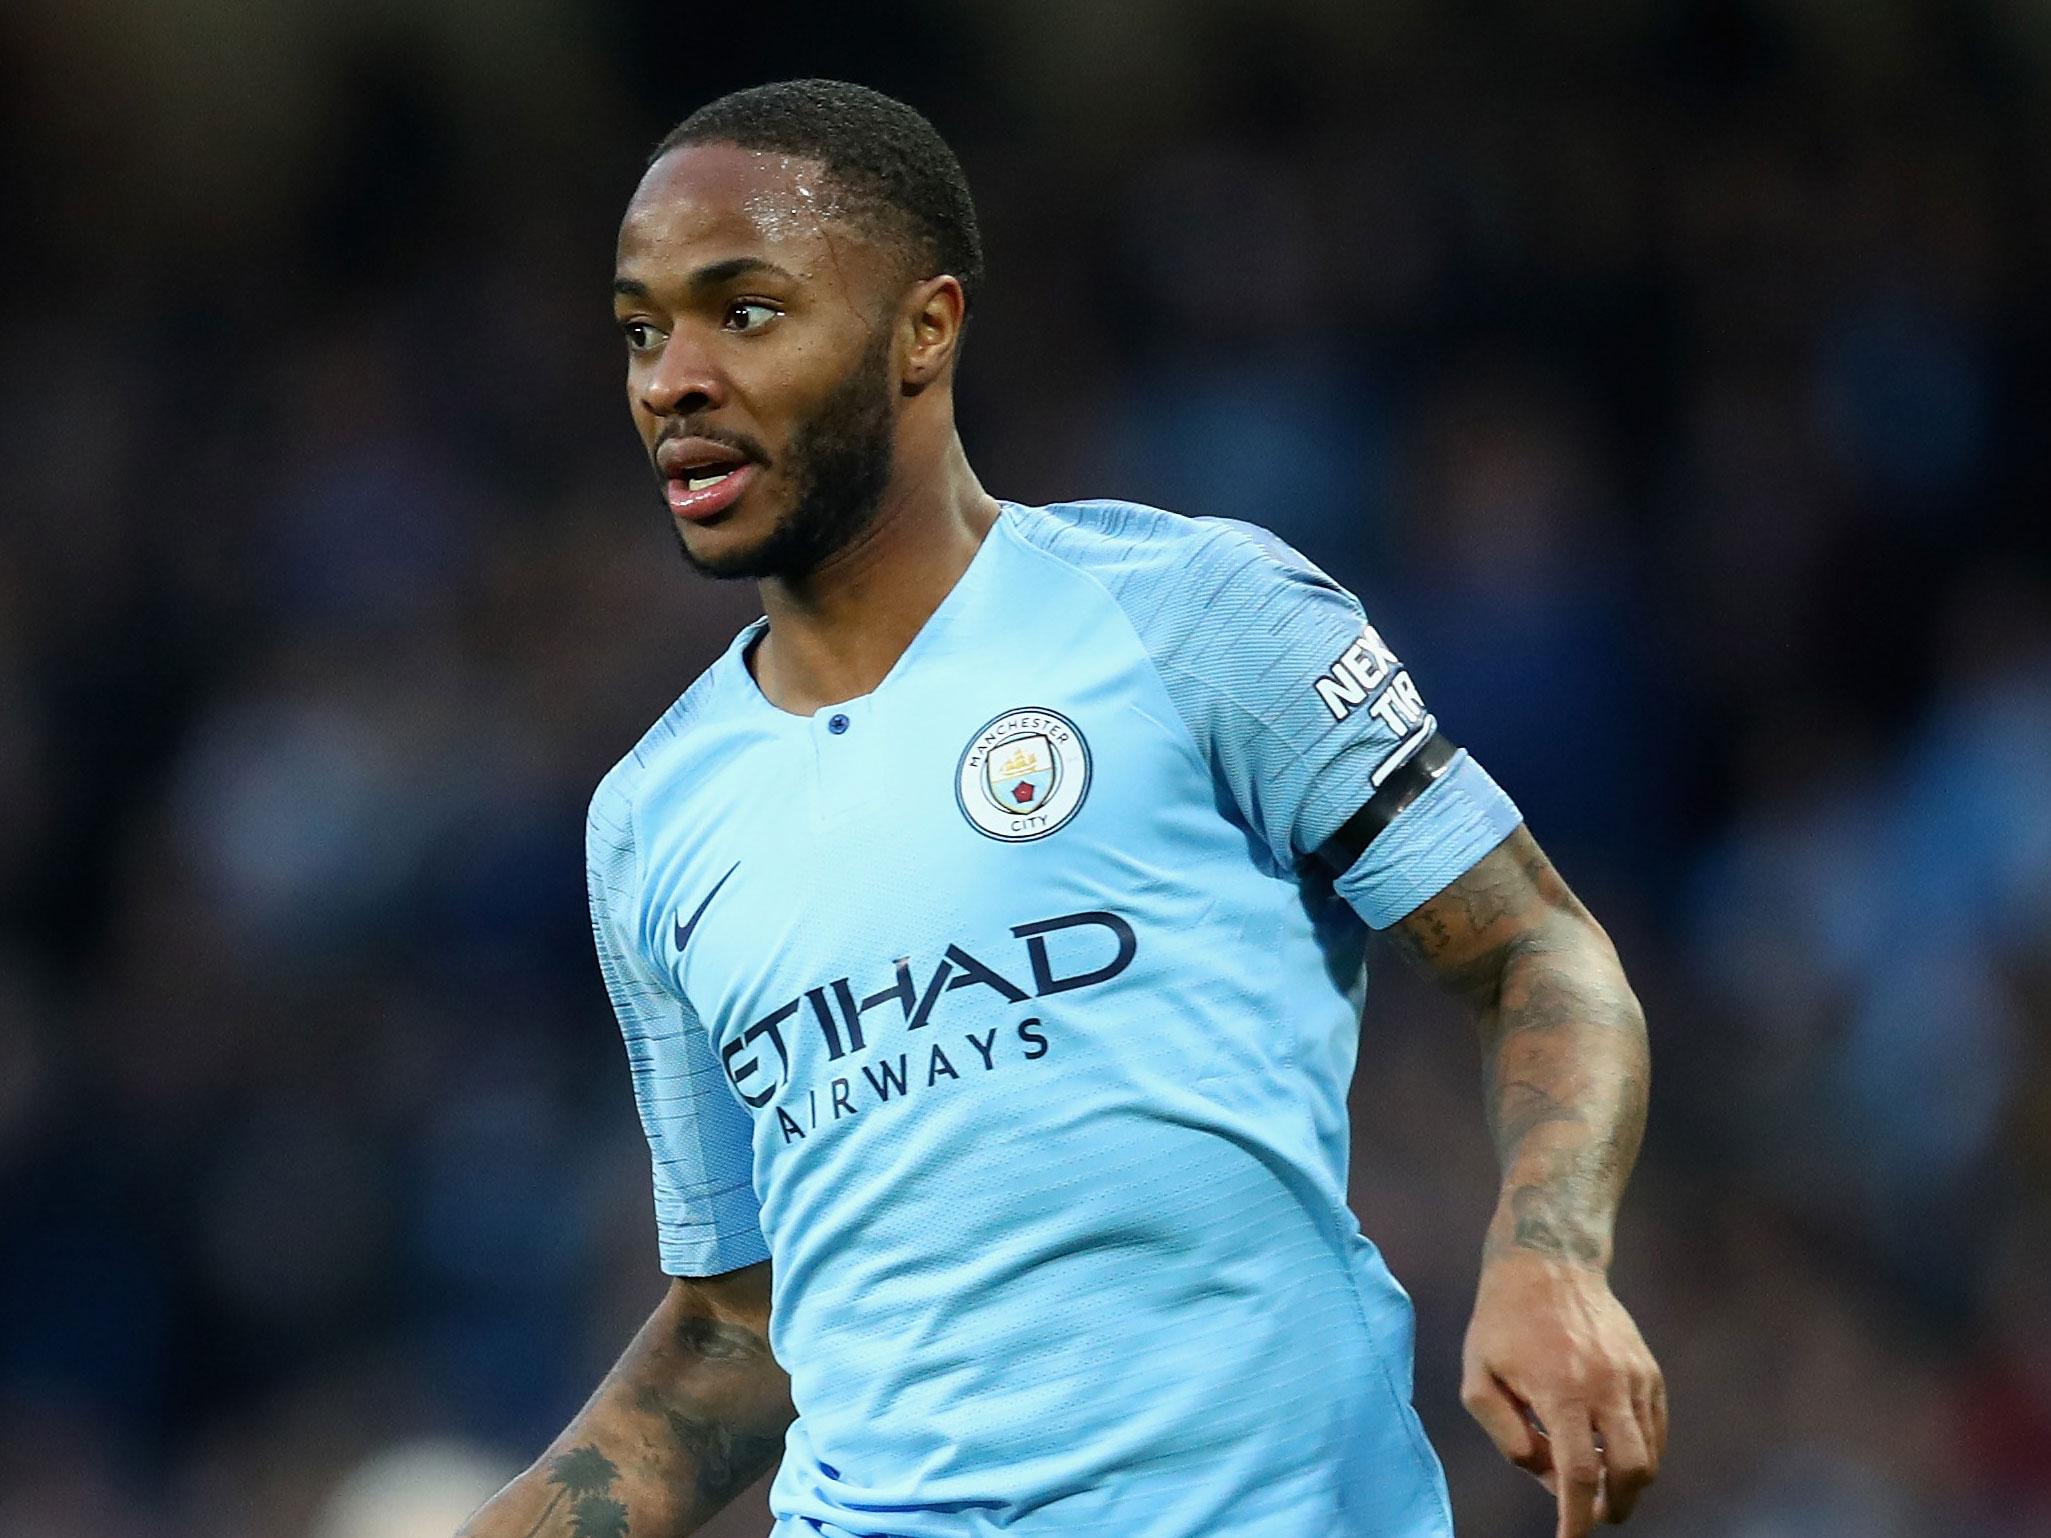 Raheem Sterling has been targeted by the media in similar ways to Cole